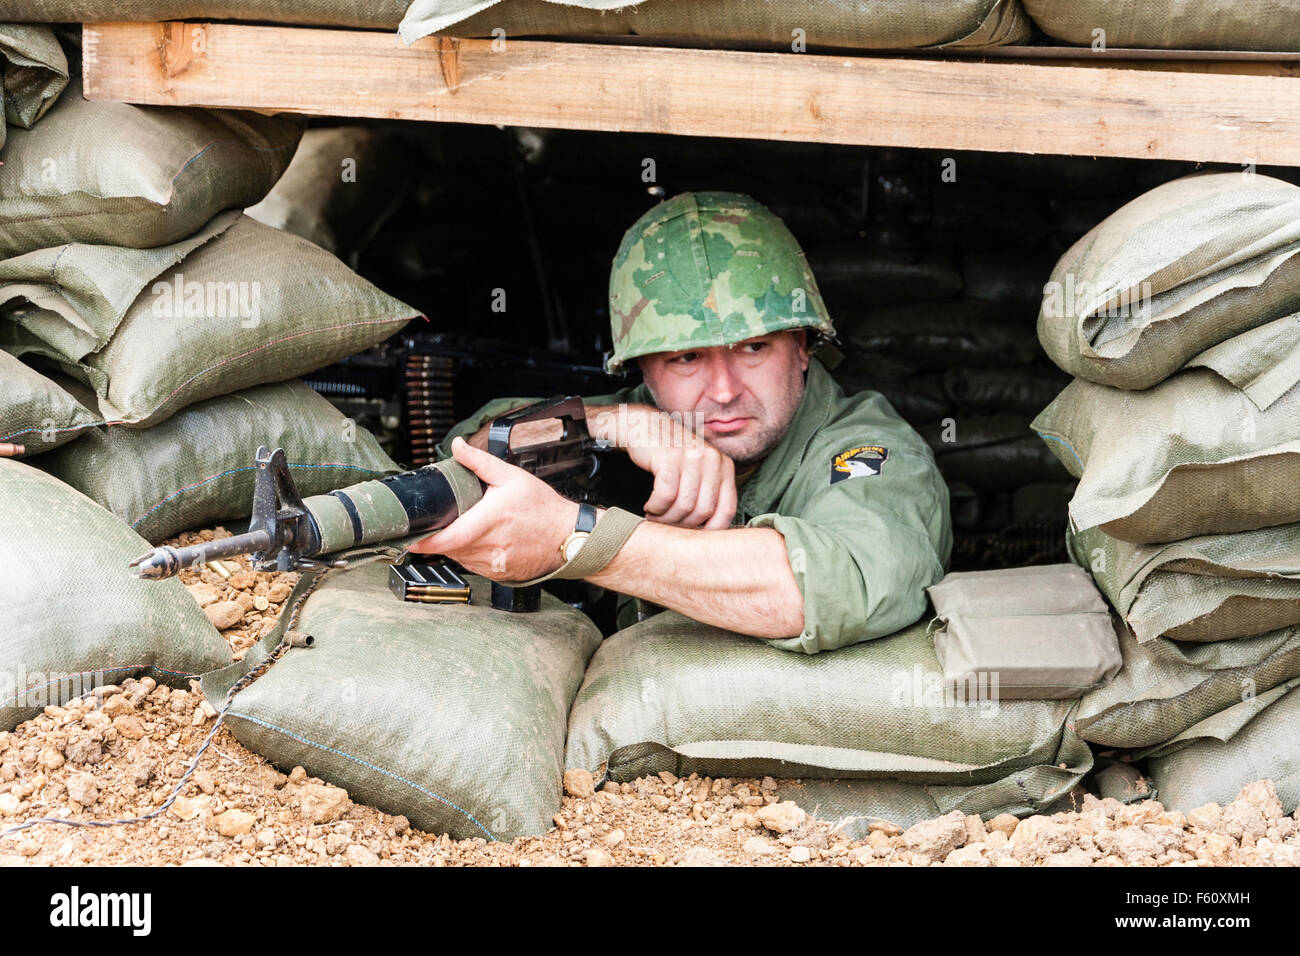 Vietnam war 'rolling thunder' re-enactment. US Marine in bunker, leaning on M16 rifle, with bored expression while on guard duty. Facing. Stock Photo